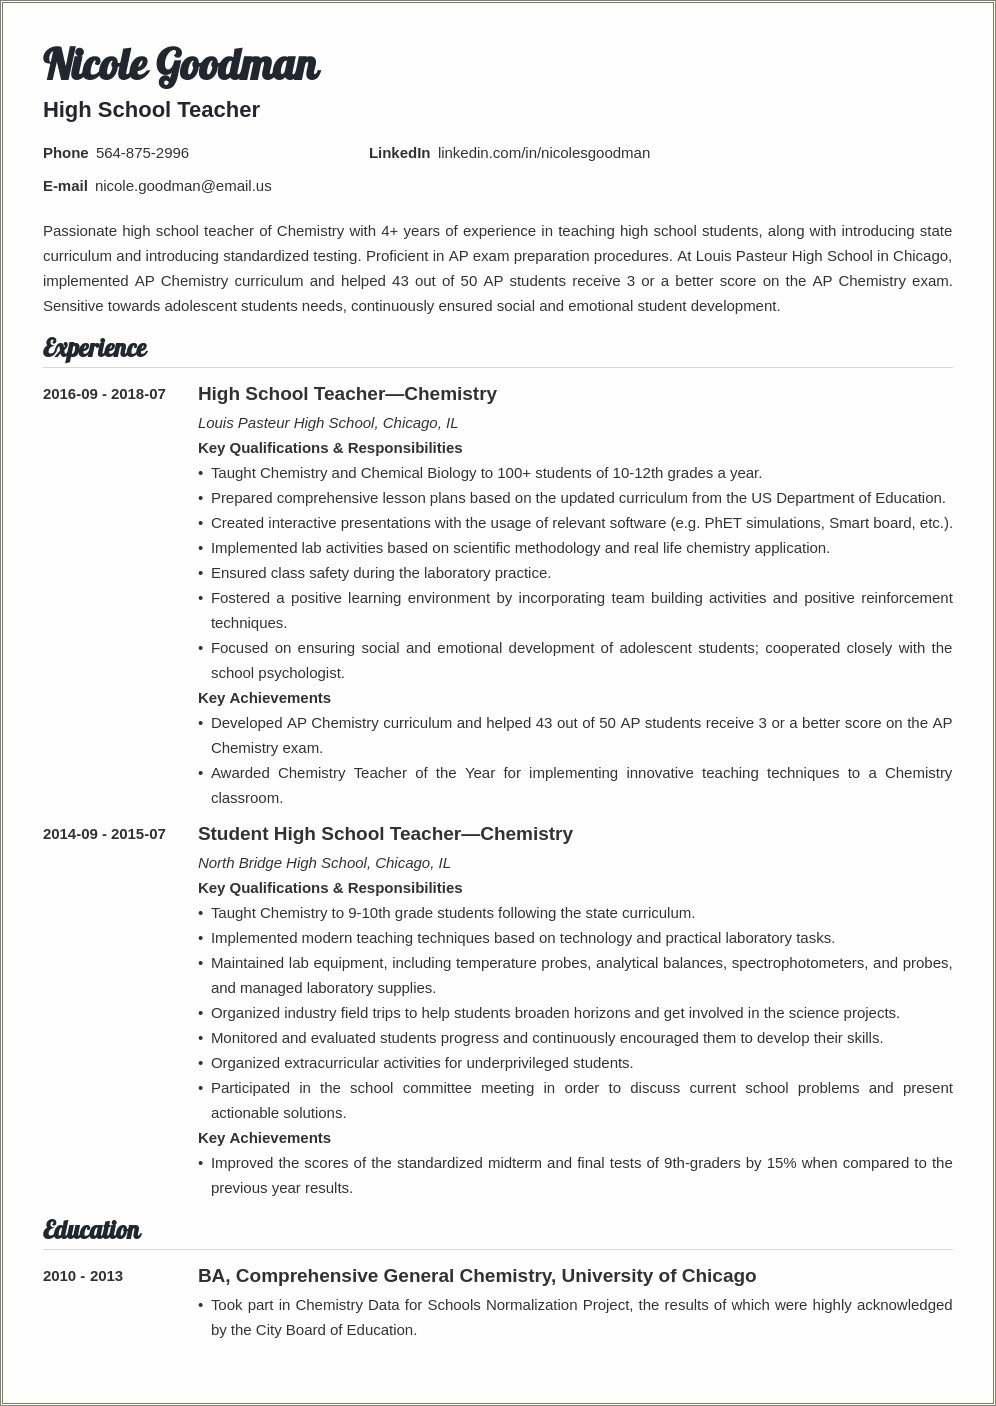 Resume Examples For Dfps Assistant Objective